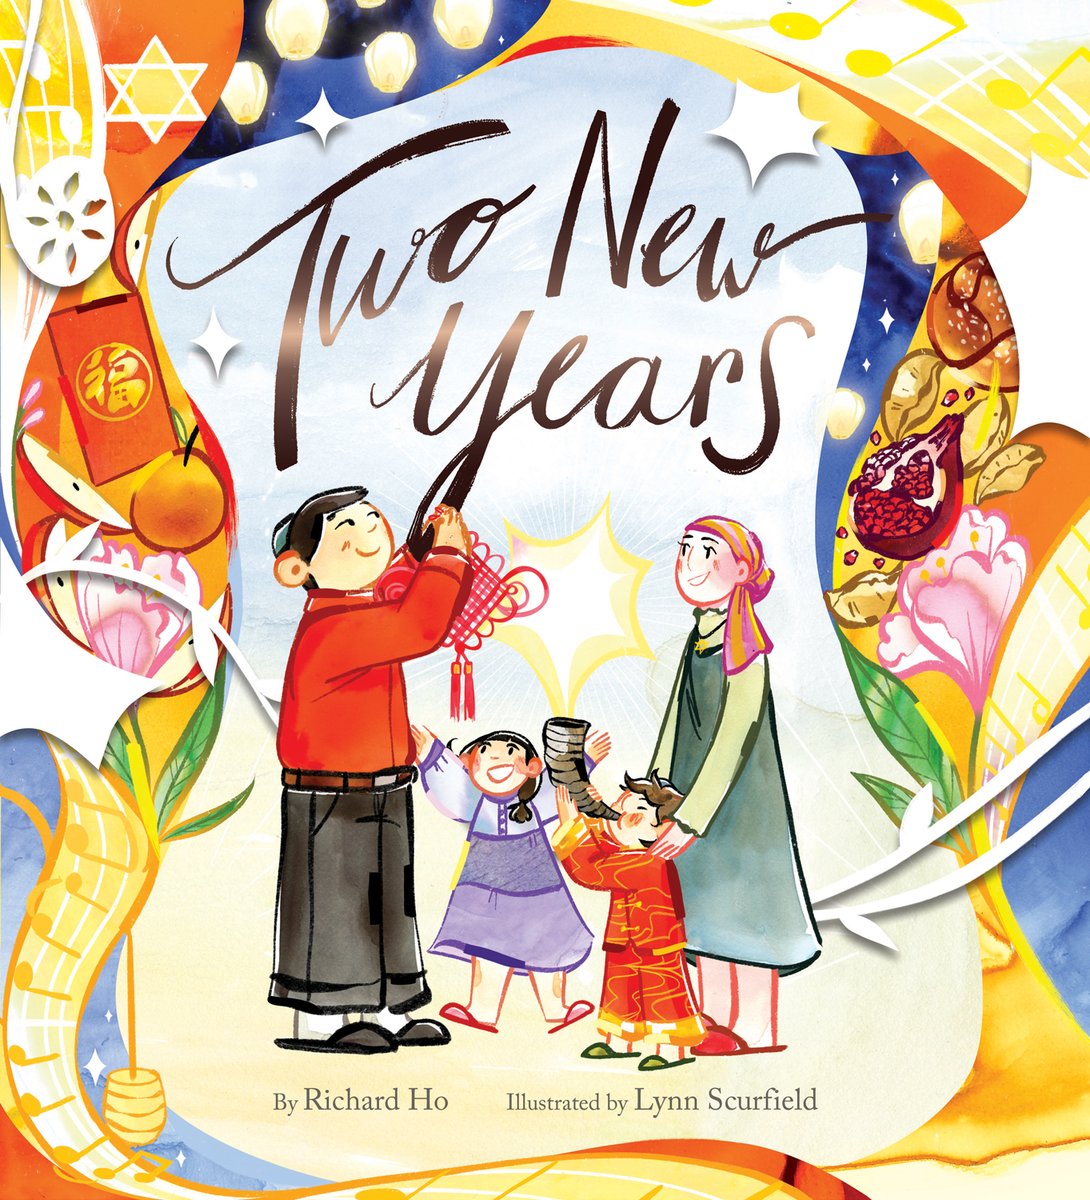 'A bright, sparkling celebration of a multicultural family.' Thank you @KirkusReviews for this wonderful review of TWO NEW YEARS! bit.ly/3J5P6oH Less than 2 months until launch! @lynndoodles @ChronicleBooks @ChronicleKids